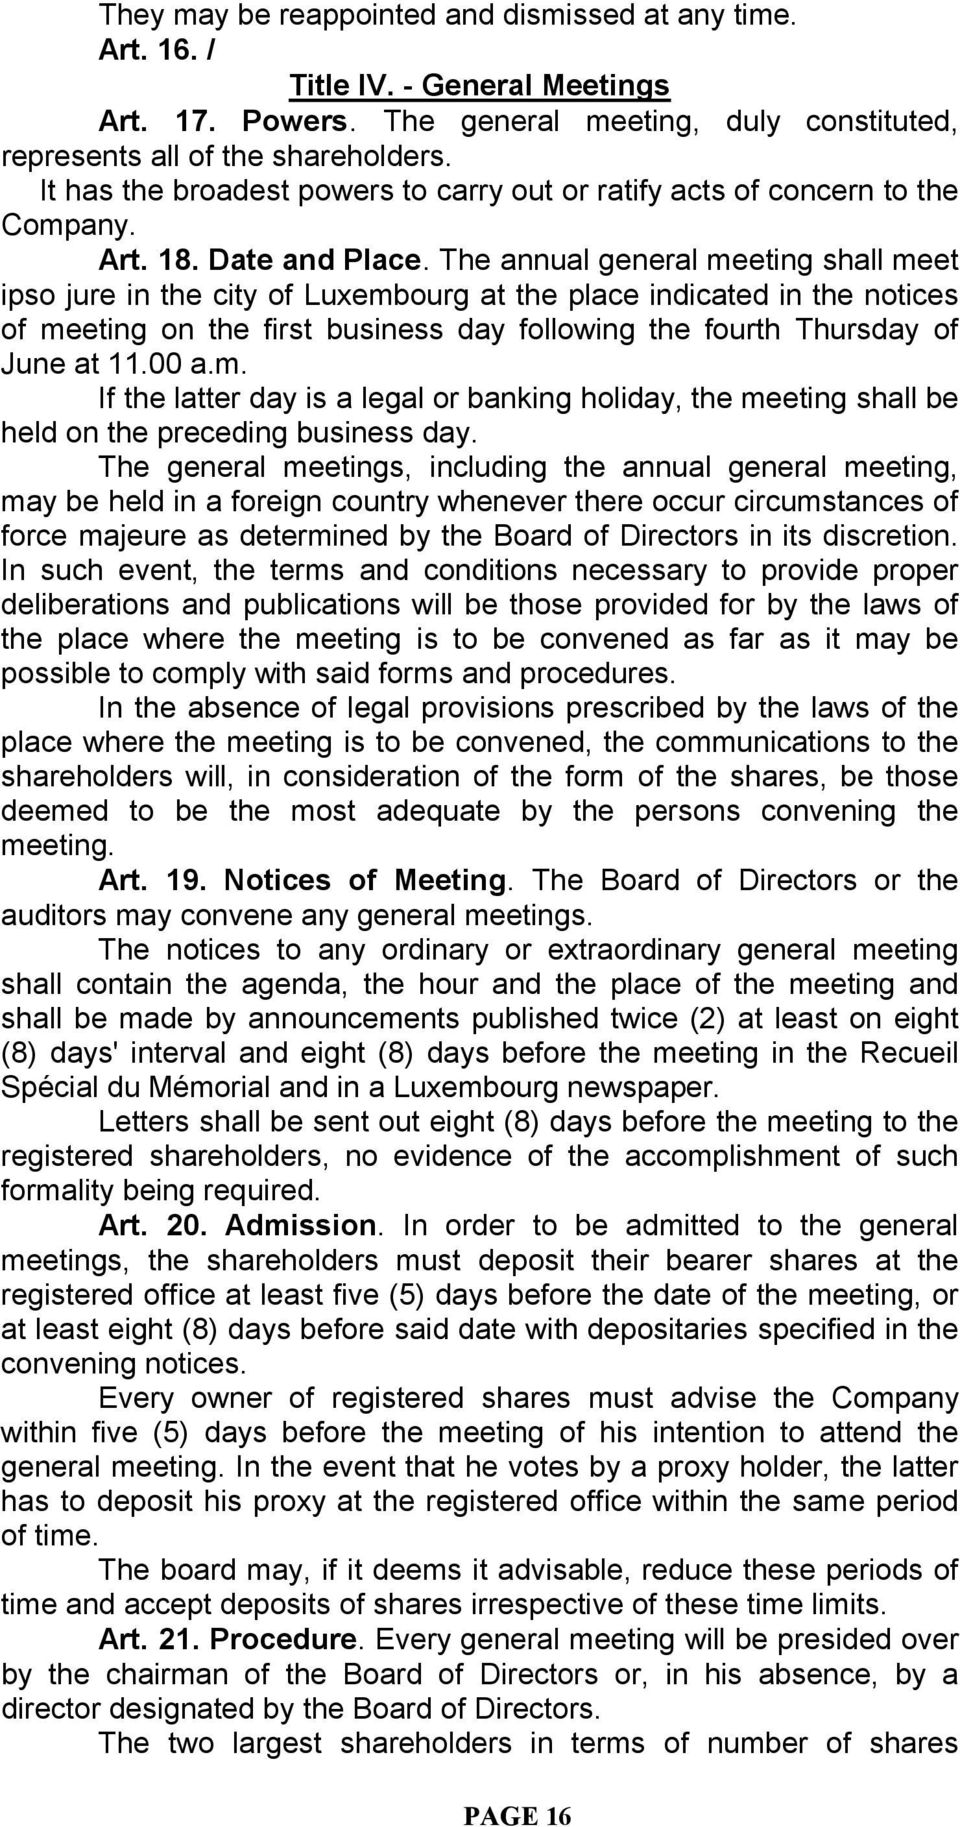 The annual general meeting shall meet ipso jure in the city of Luxembourg at the place indicated in the notices of meeting on the first business day following the fourth Thursday of June at 11.00 a.m. If the latter day is a legal or banking holiday, the meeting shall be held on the preceding business day.